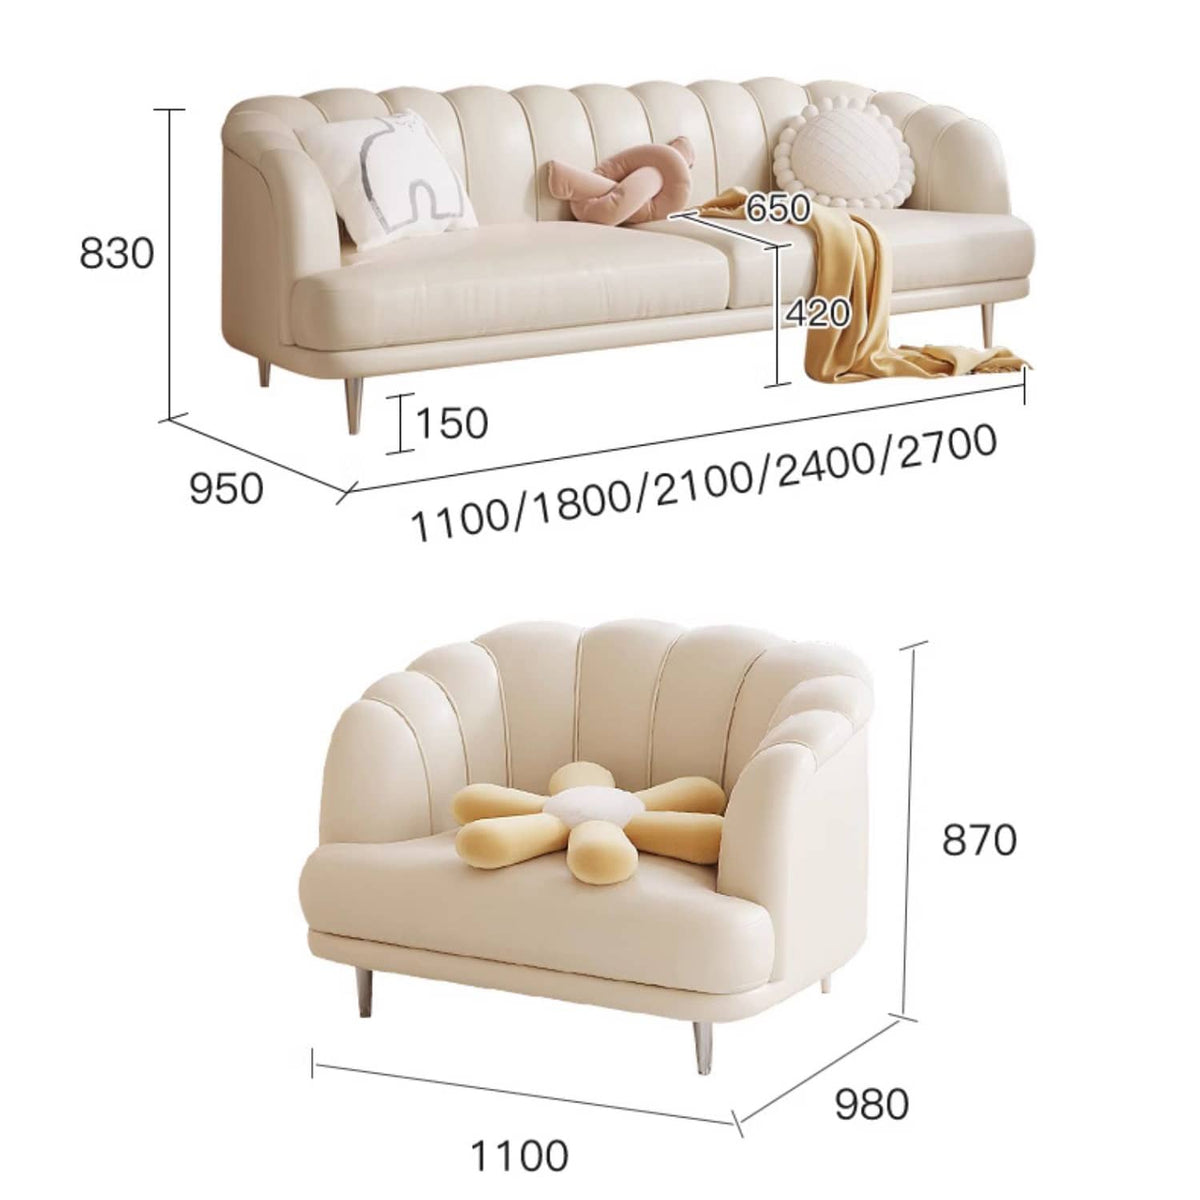 Elegant Solid Wood Sofa in Beige, Gray, and Brown Cotton Fabric - Modern and Comfortable fbby-1401